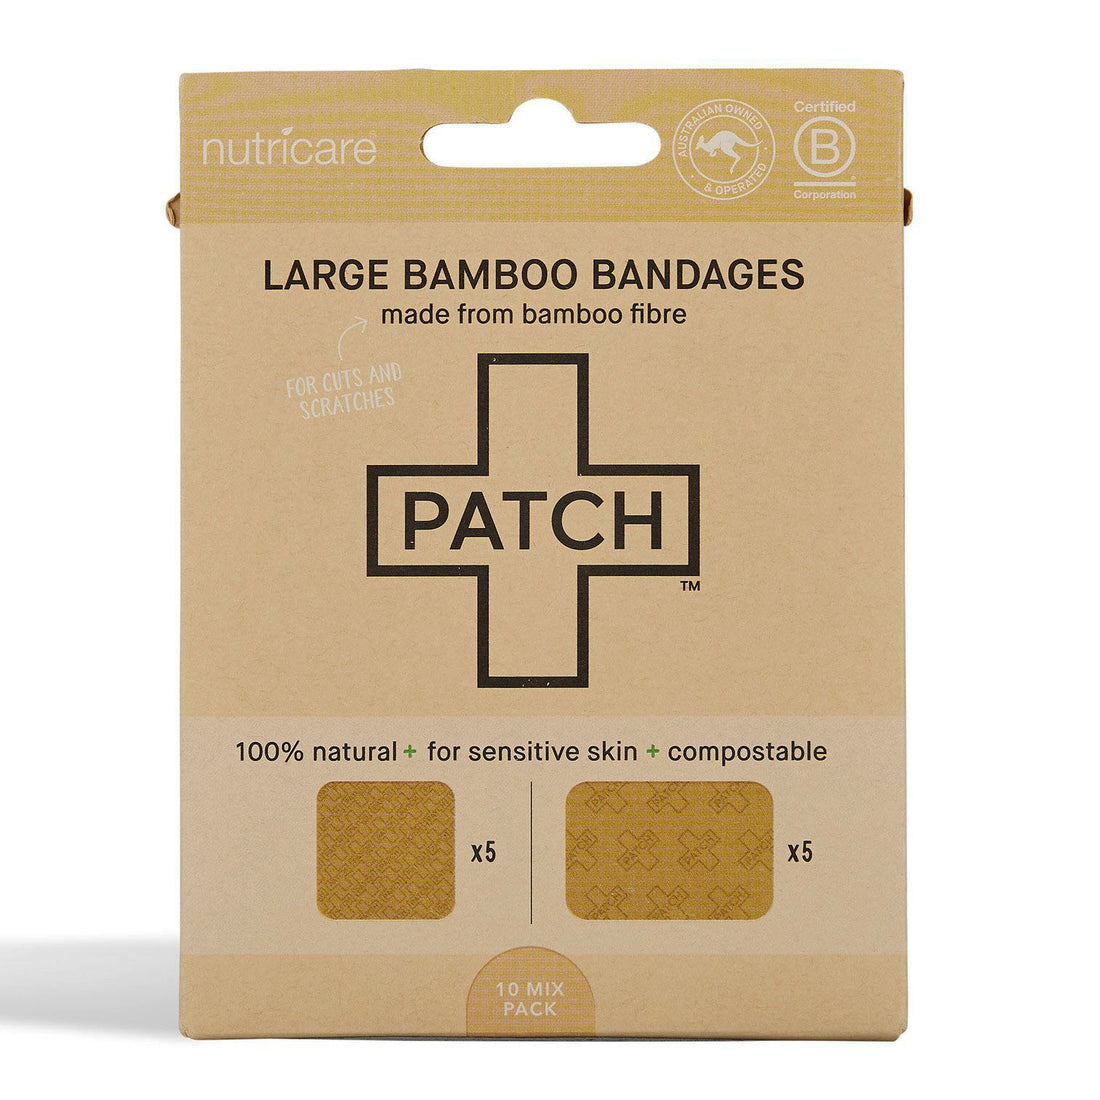 bamboo bandages in packaging